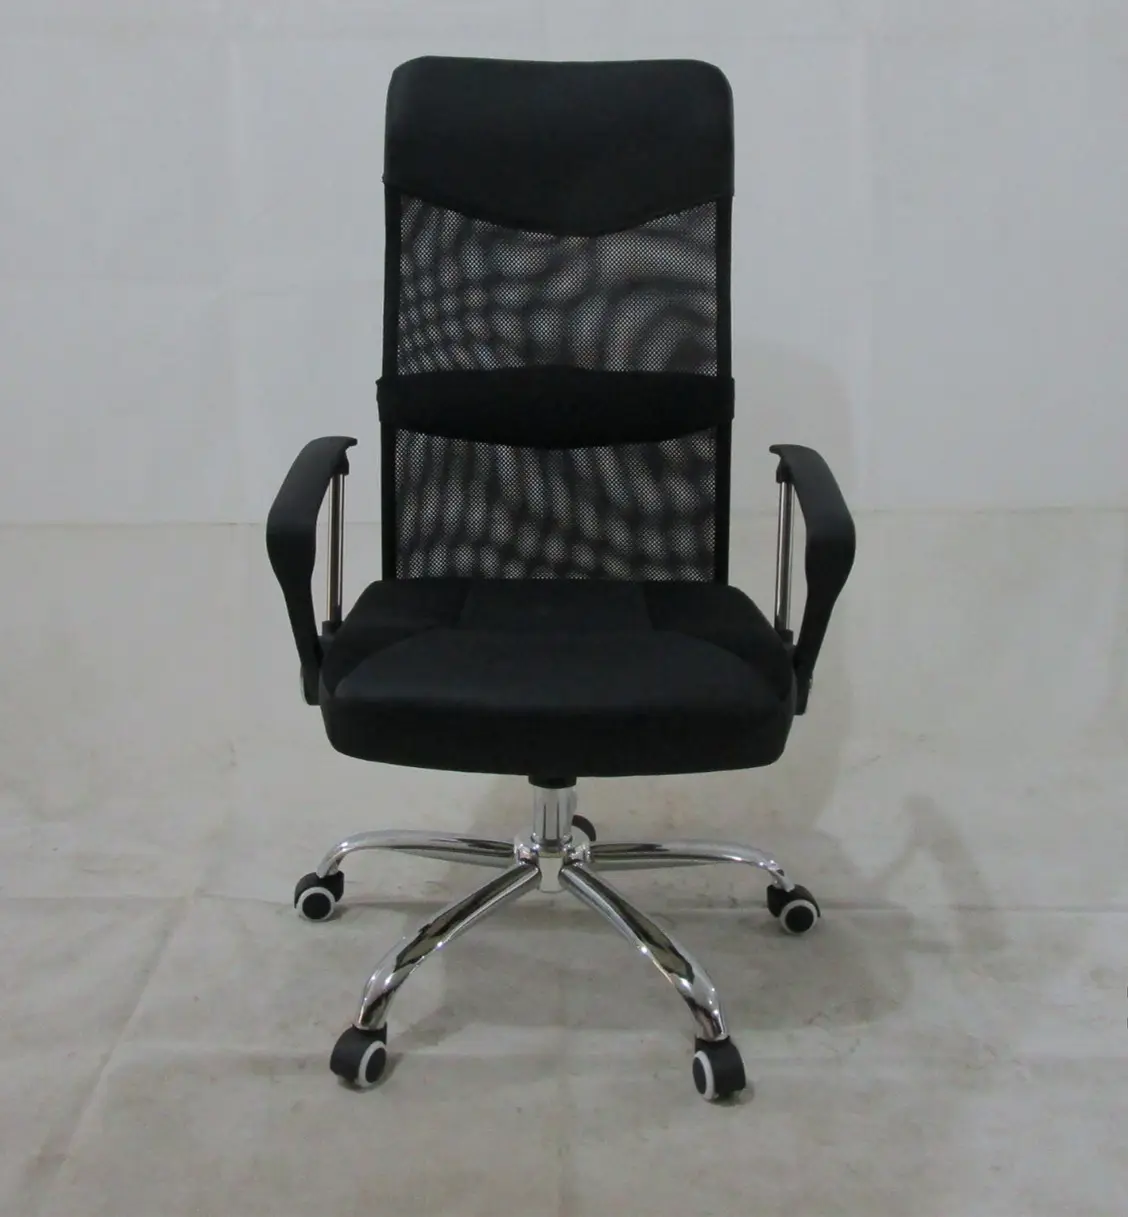 Hot sell classic high quality office chair/office swivel chair high back chair